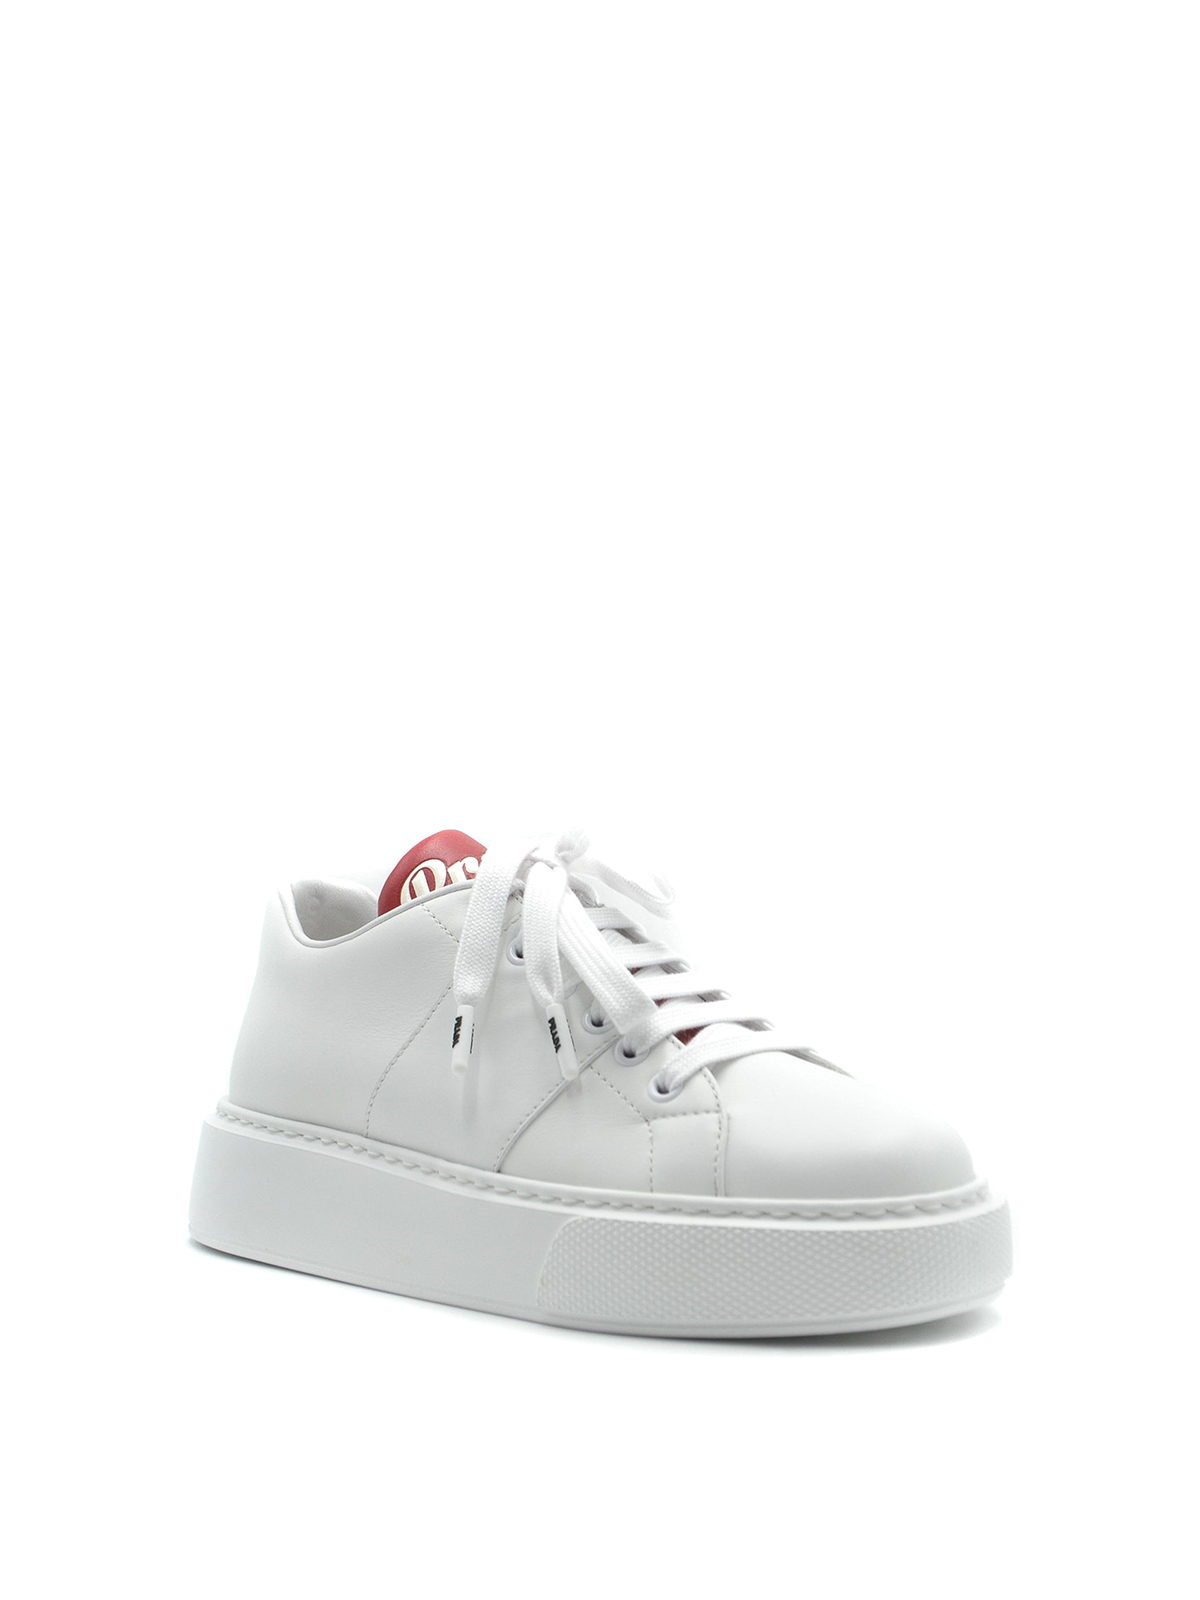 white and red prada sneakers